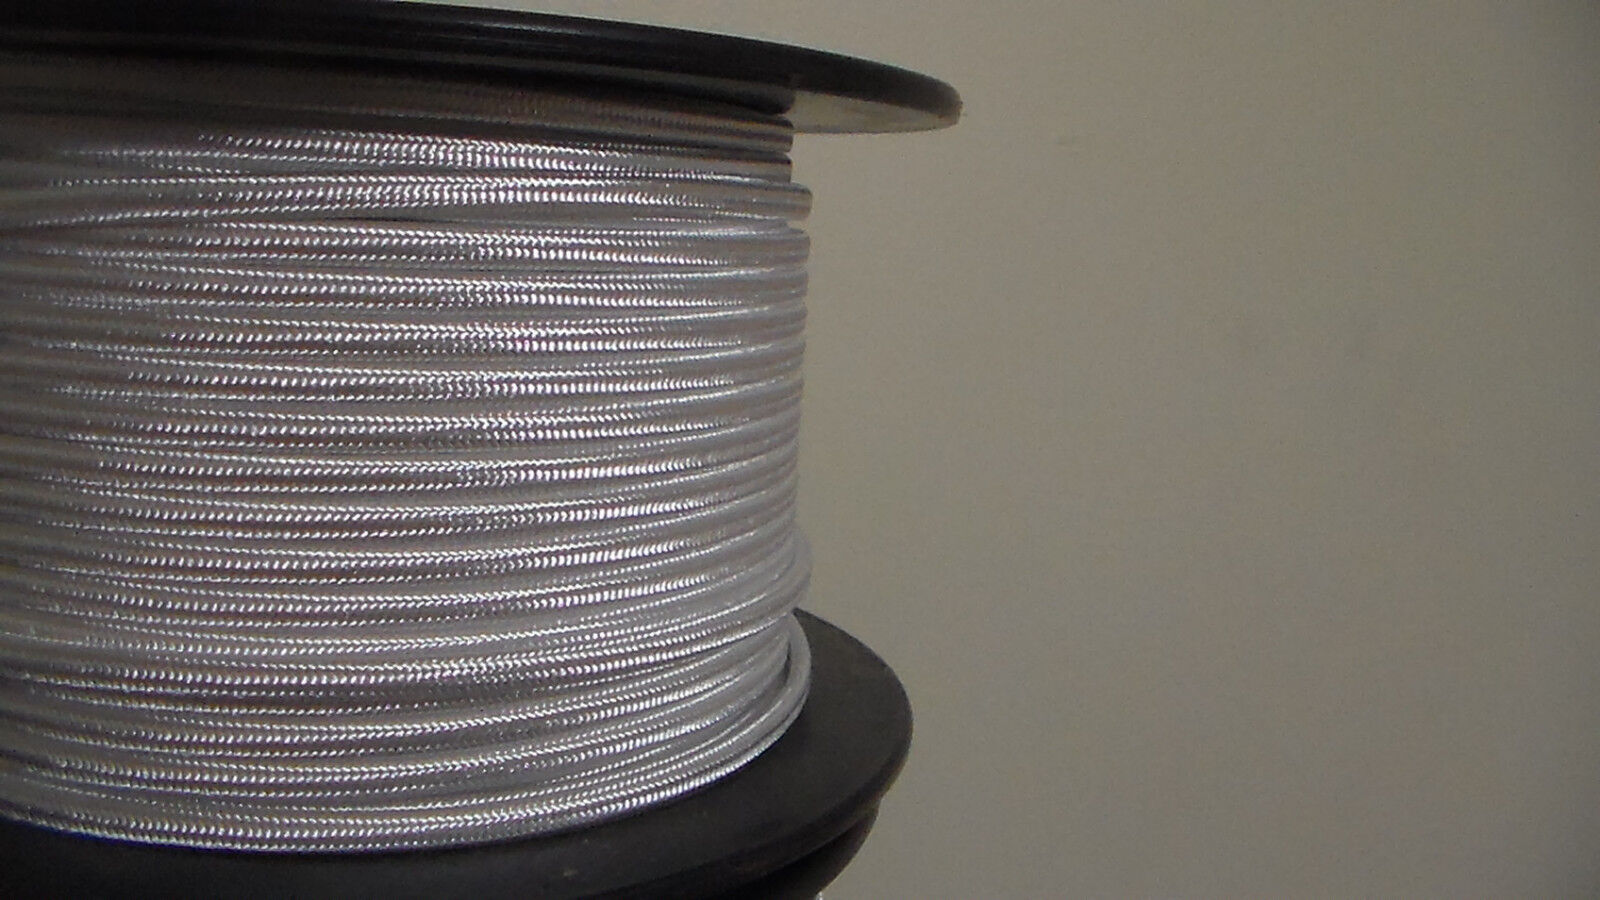 25 Ft. Spool White Parallel Rayon Covered Lamp Wire Antique Vintage Style Cord